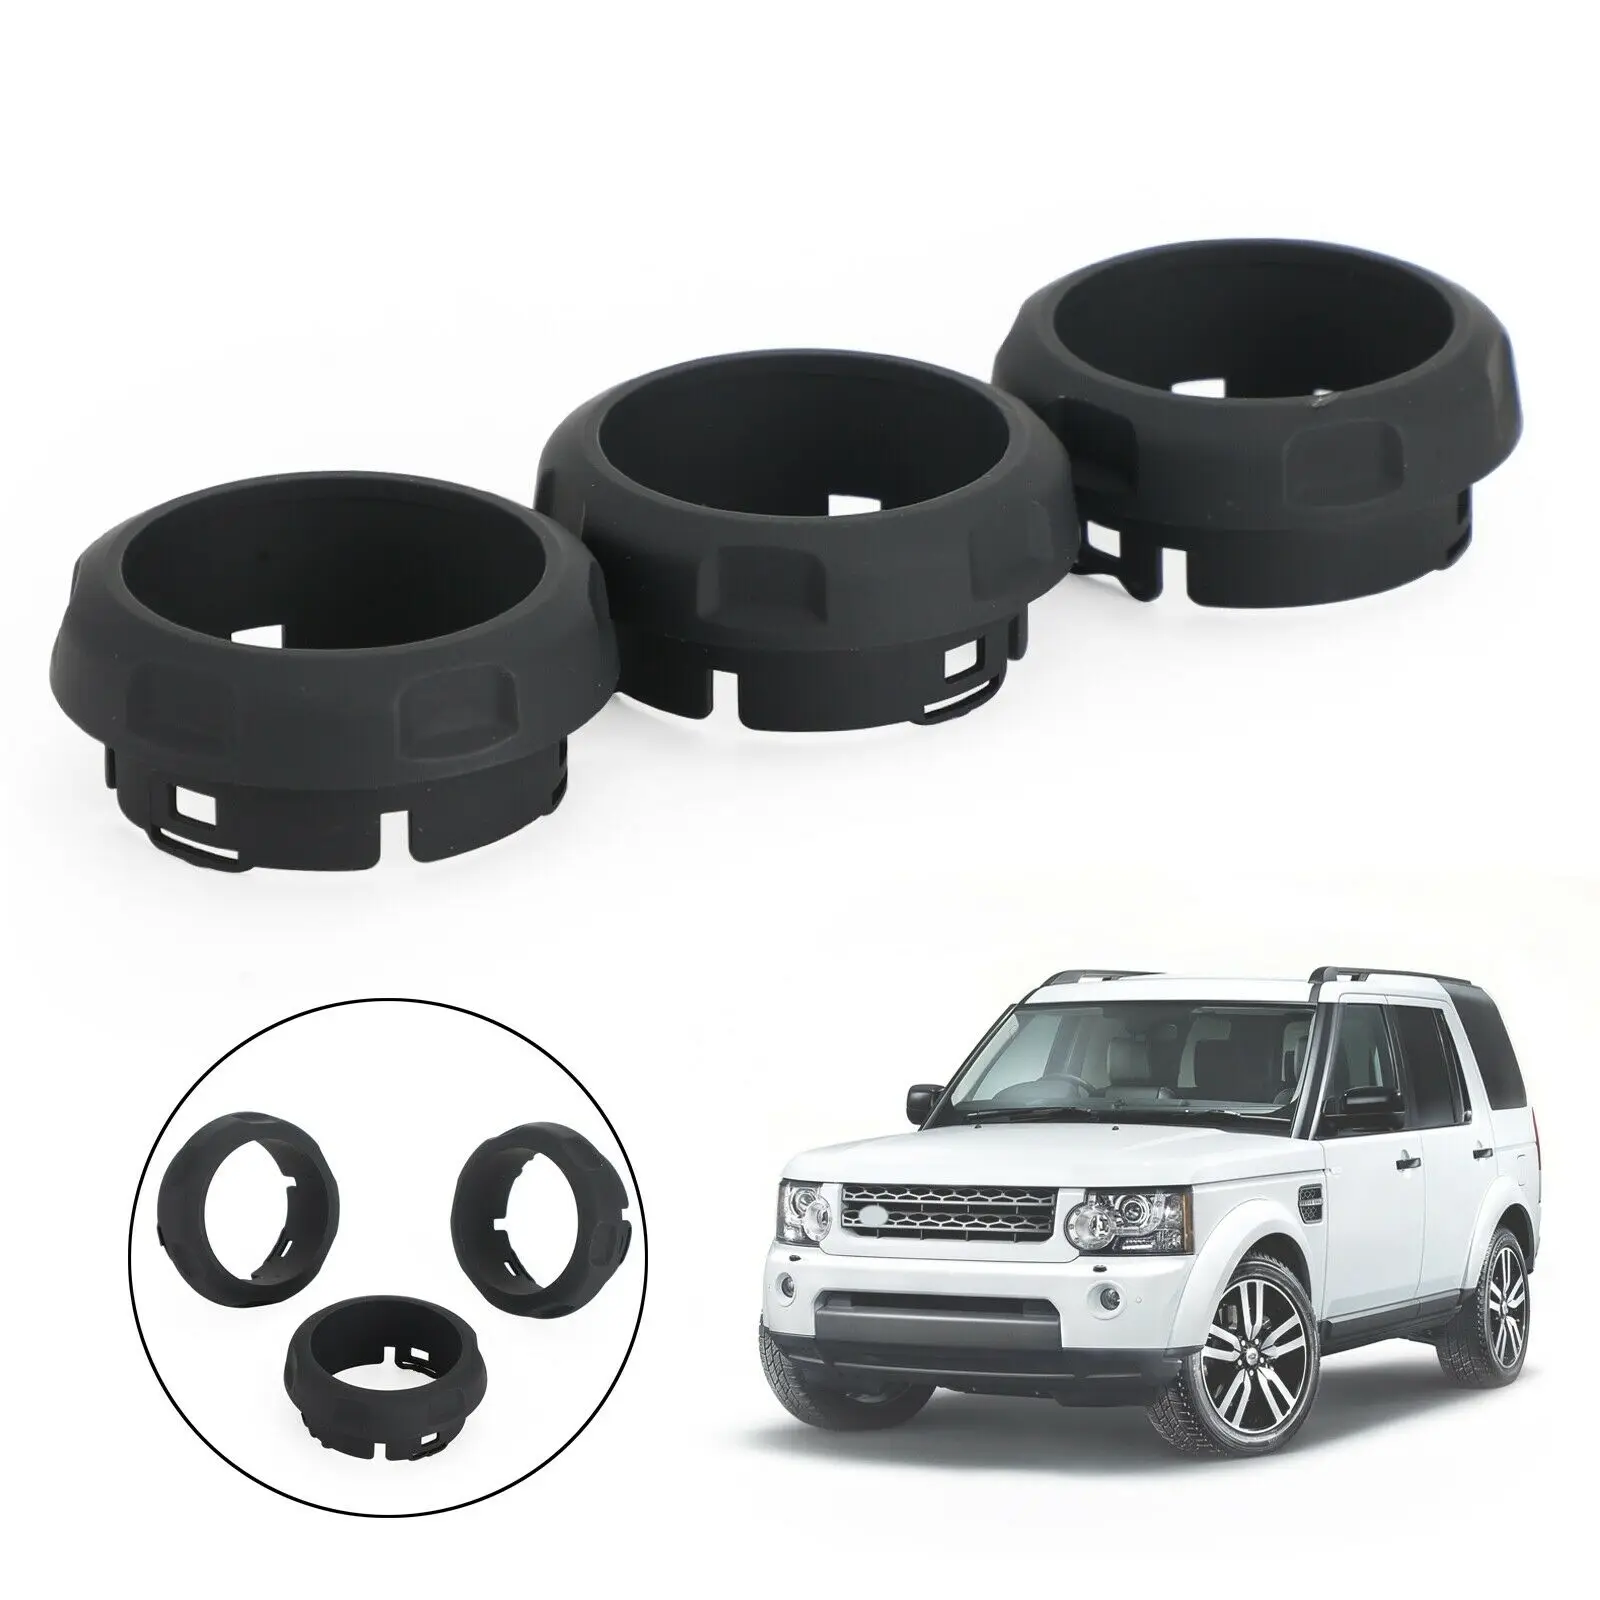 LR029591 AC Switch Knob Trim for Land Rover Discovery 4 and Range Rover Sport - $22.90